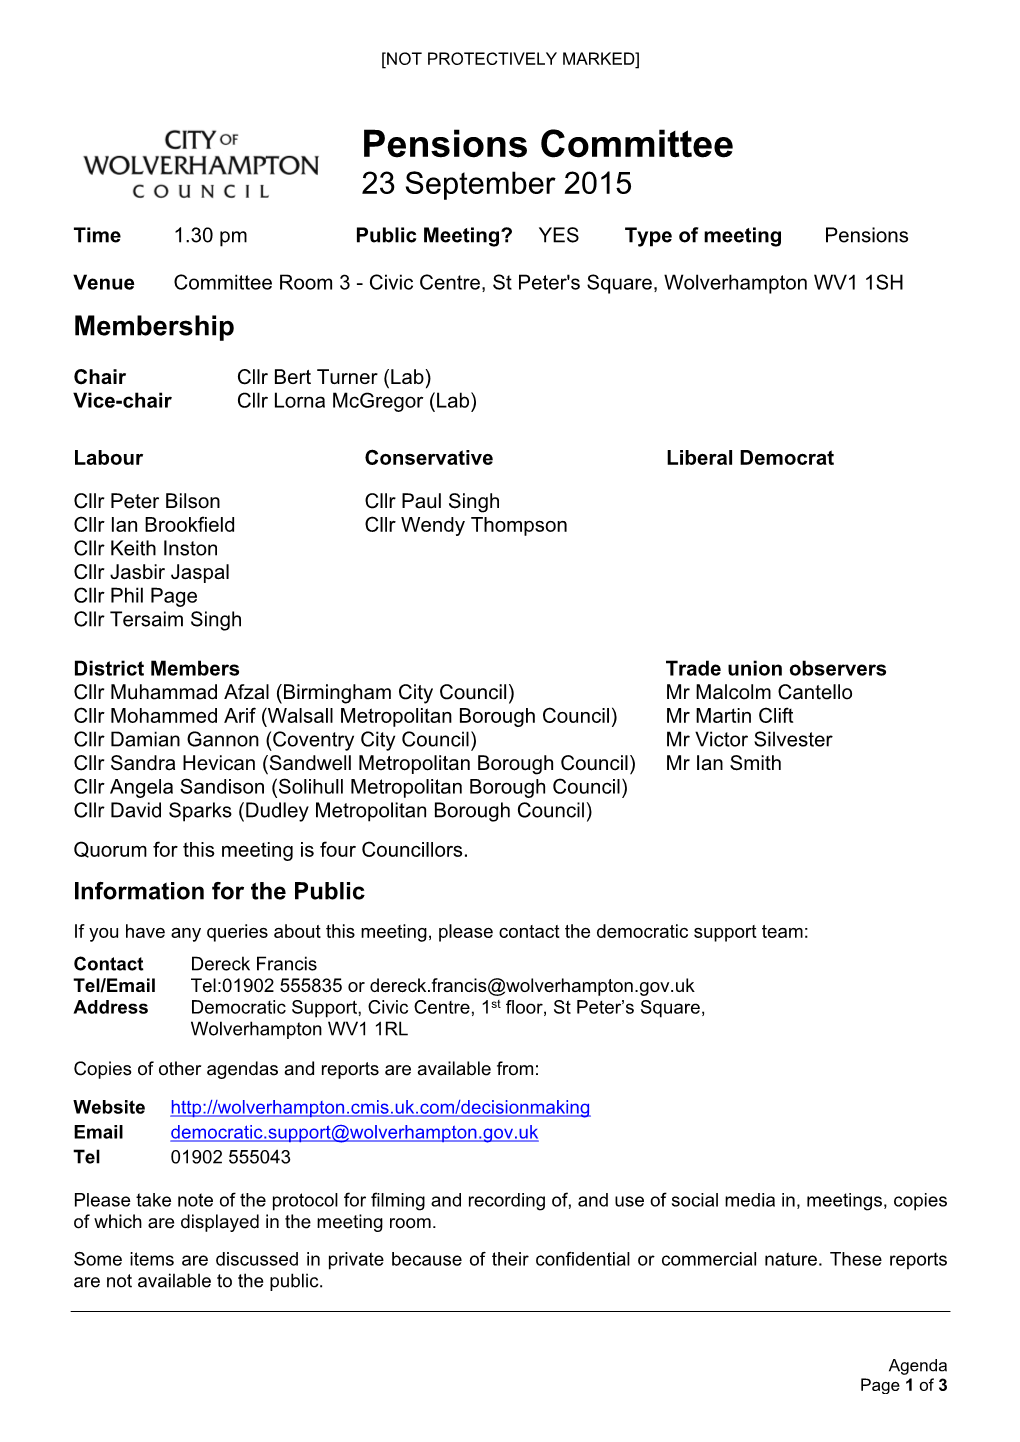 (Public Pack)Agenda Document for Pensions Committee, 23/09/2015